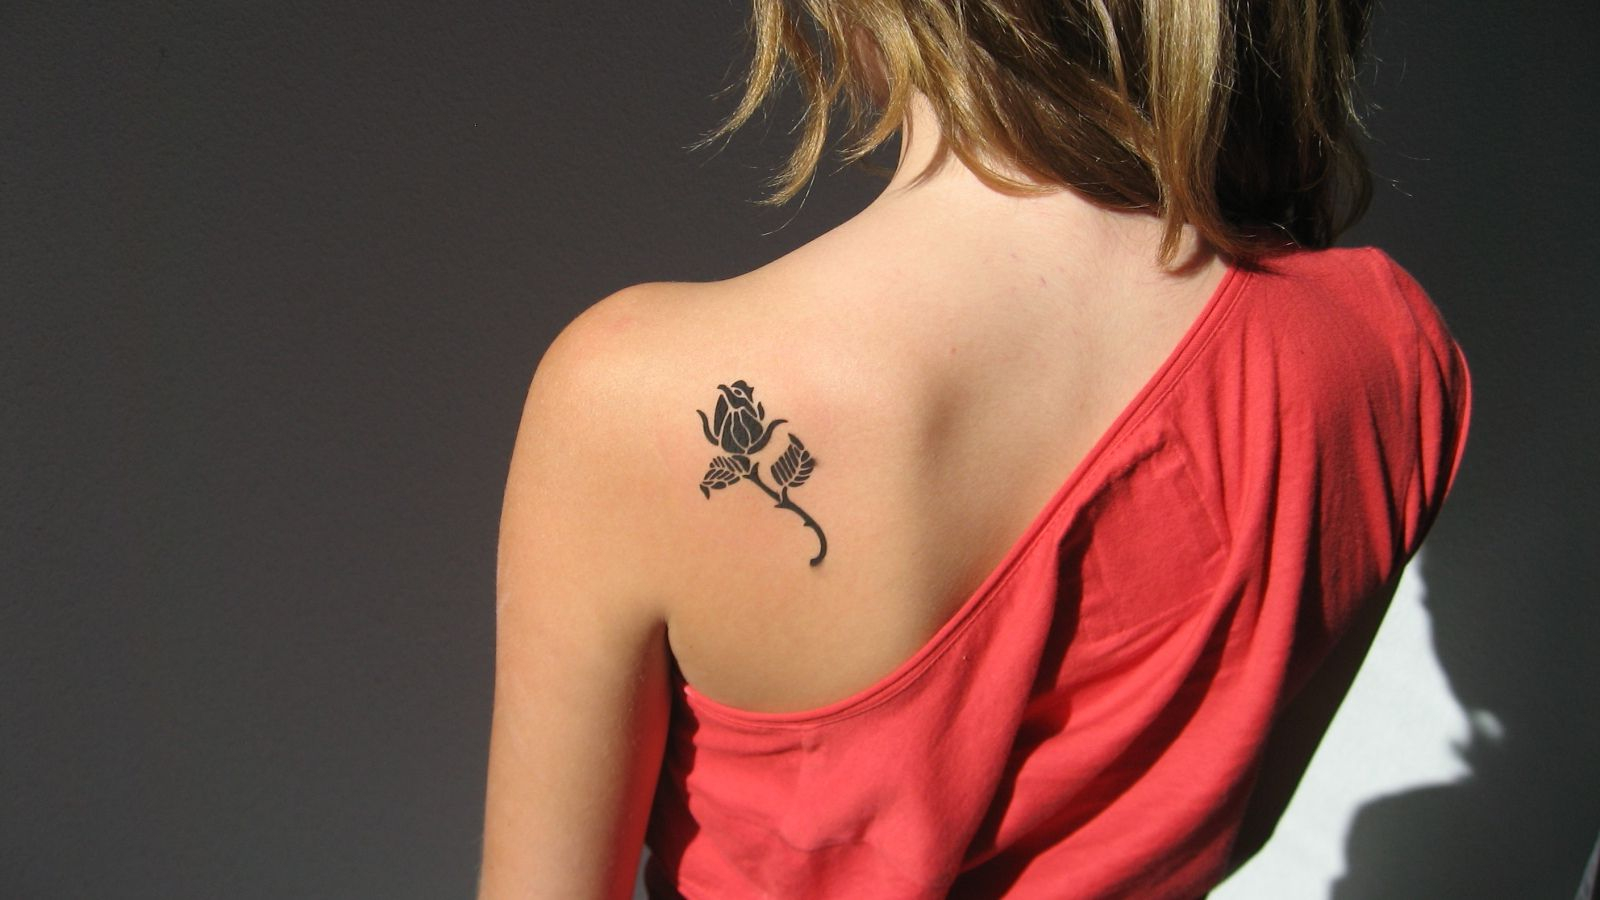 Girl Tattoos On Shoulder Blade 30 Small Cute Tattoos For Girls inside sizing 1600 X 900